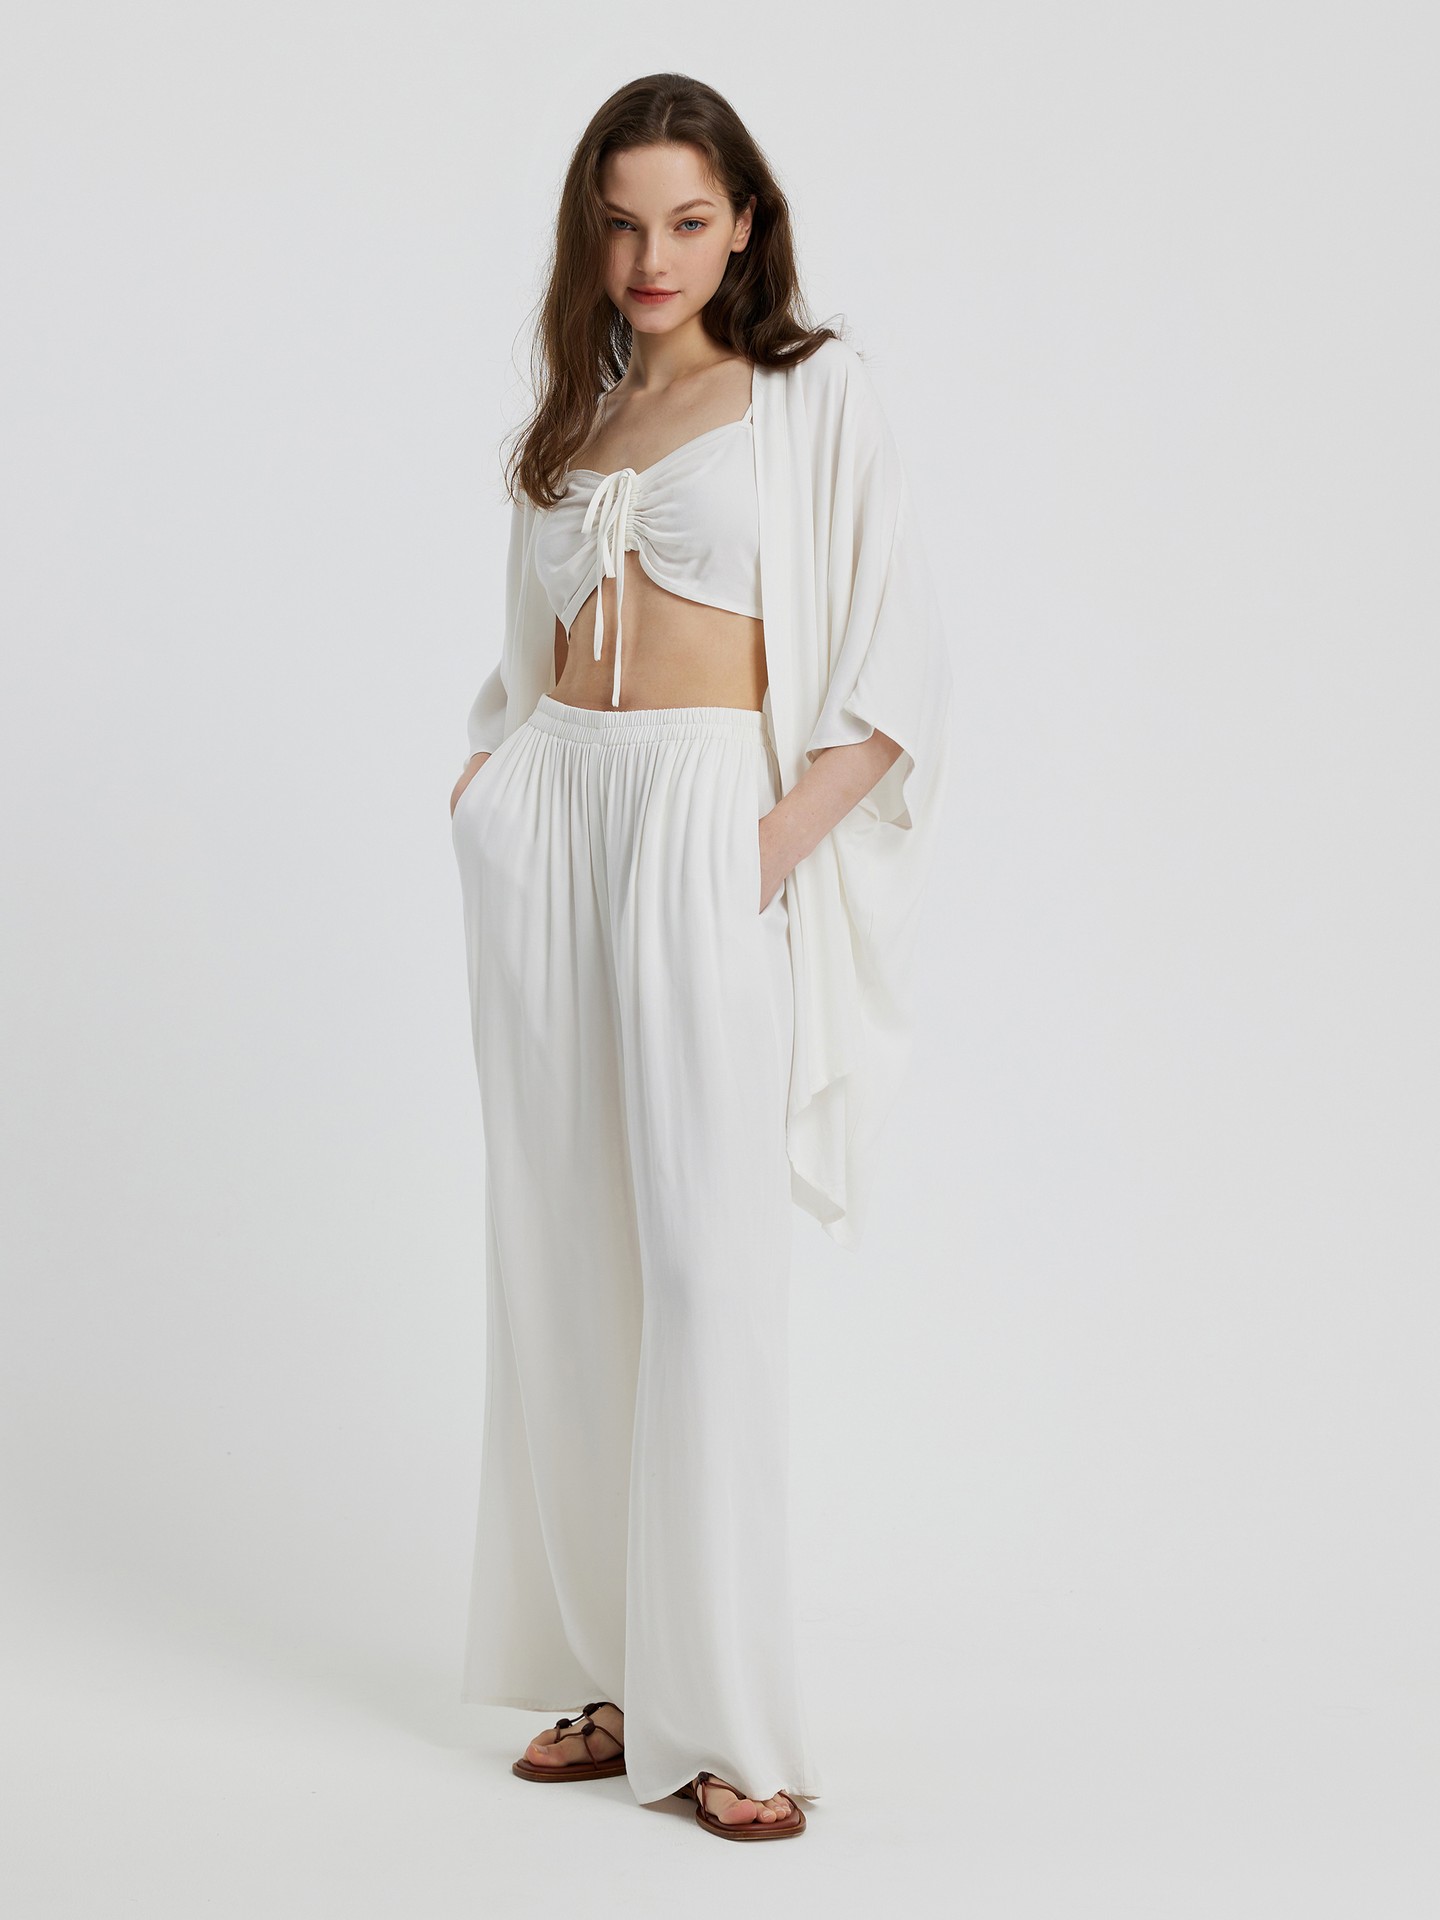 Gathered Top, Blouse And Trousers Co-ord Set丨Urbanic